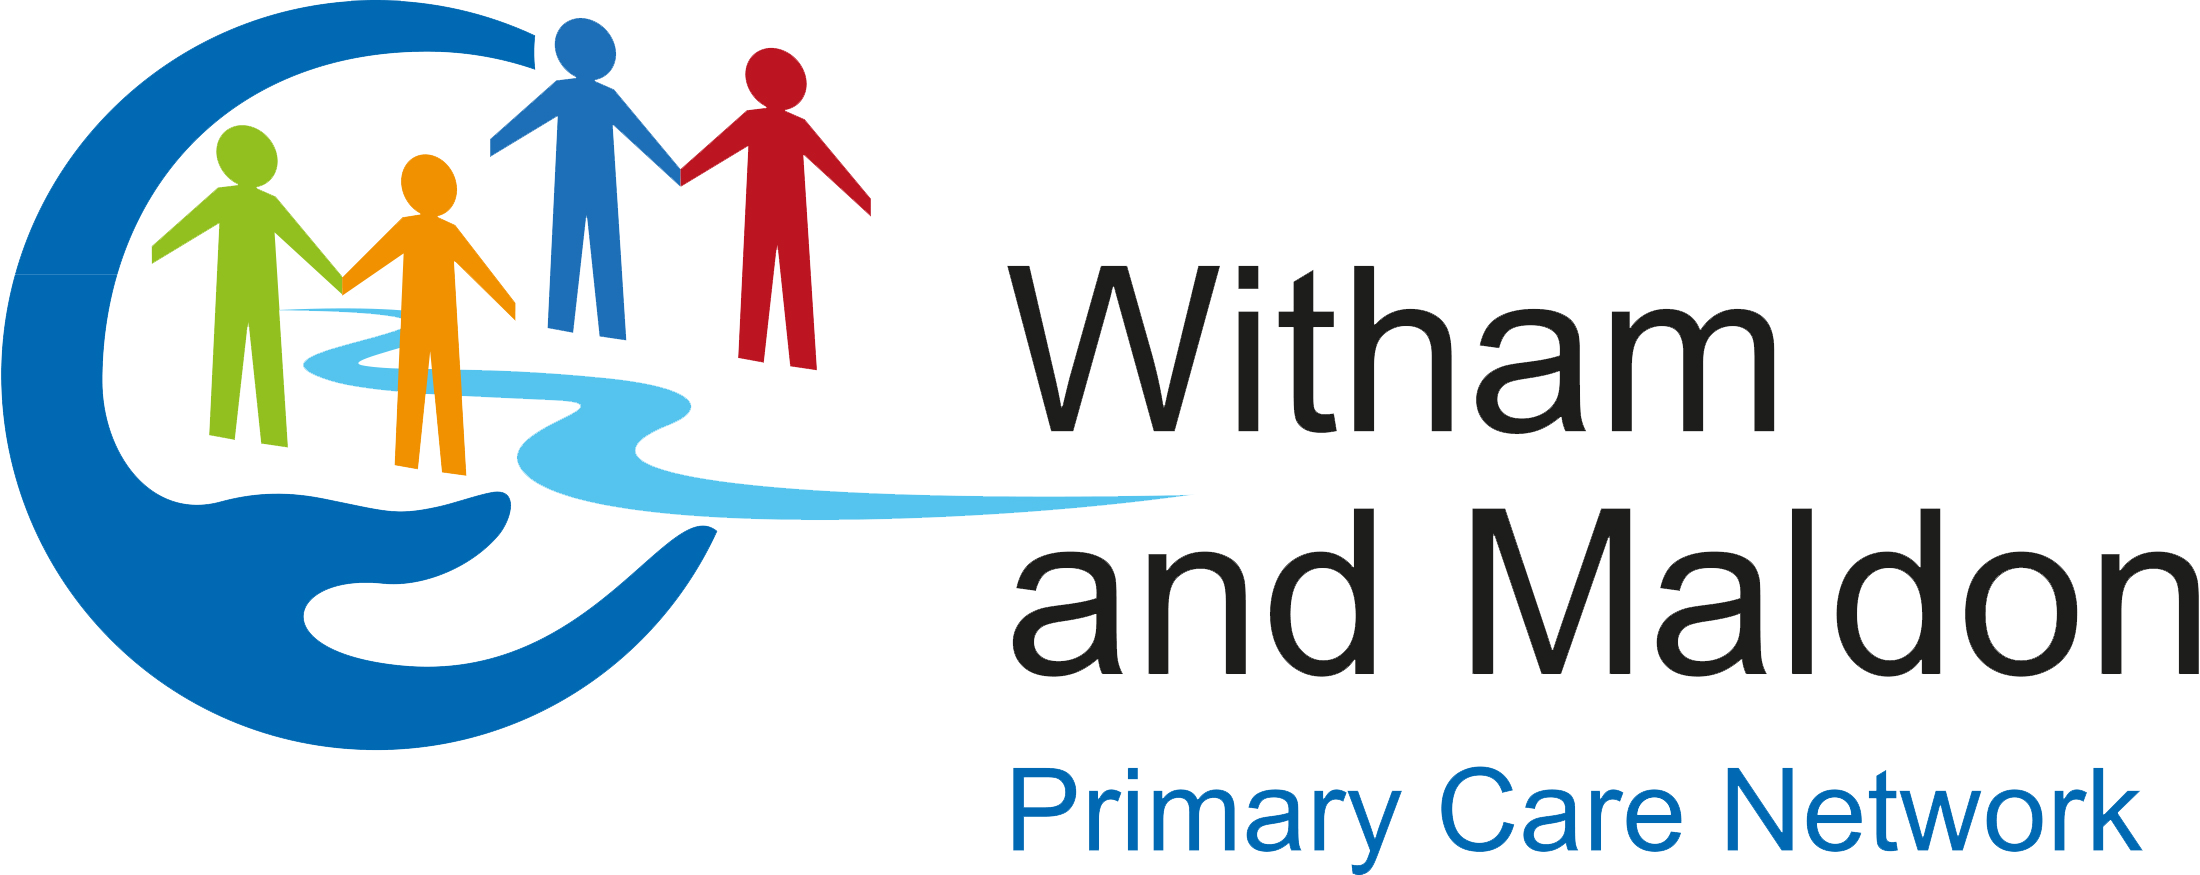 Witham and Maldon Primary Care Network logo